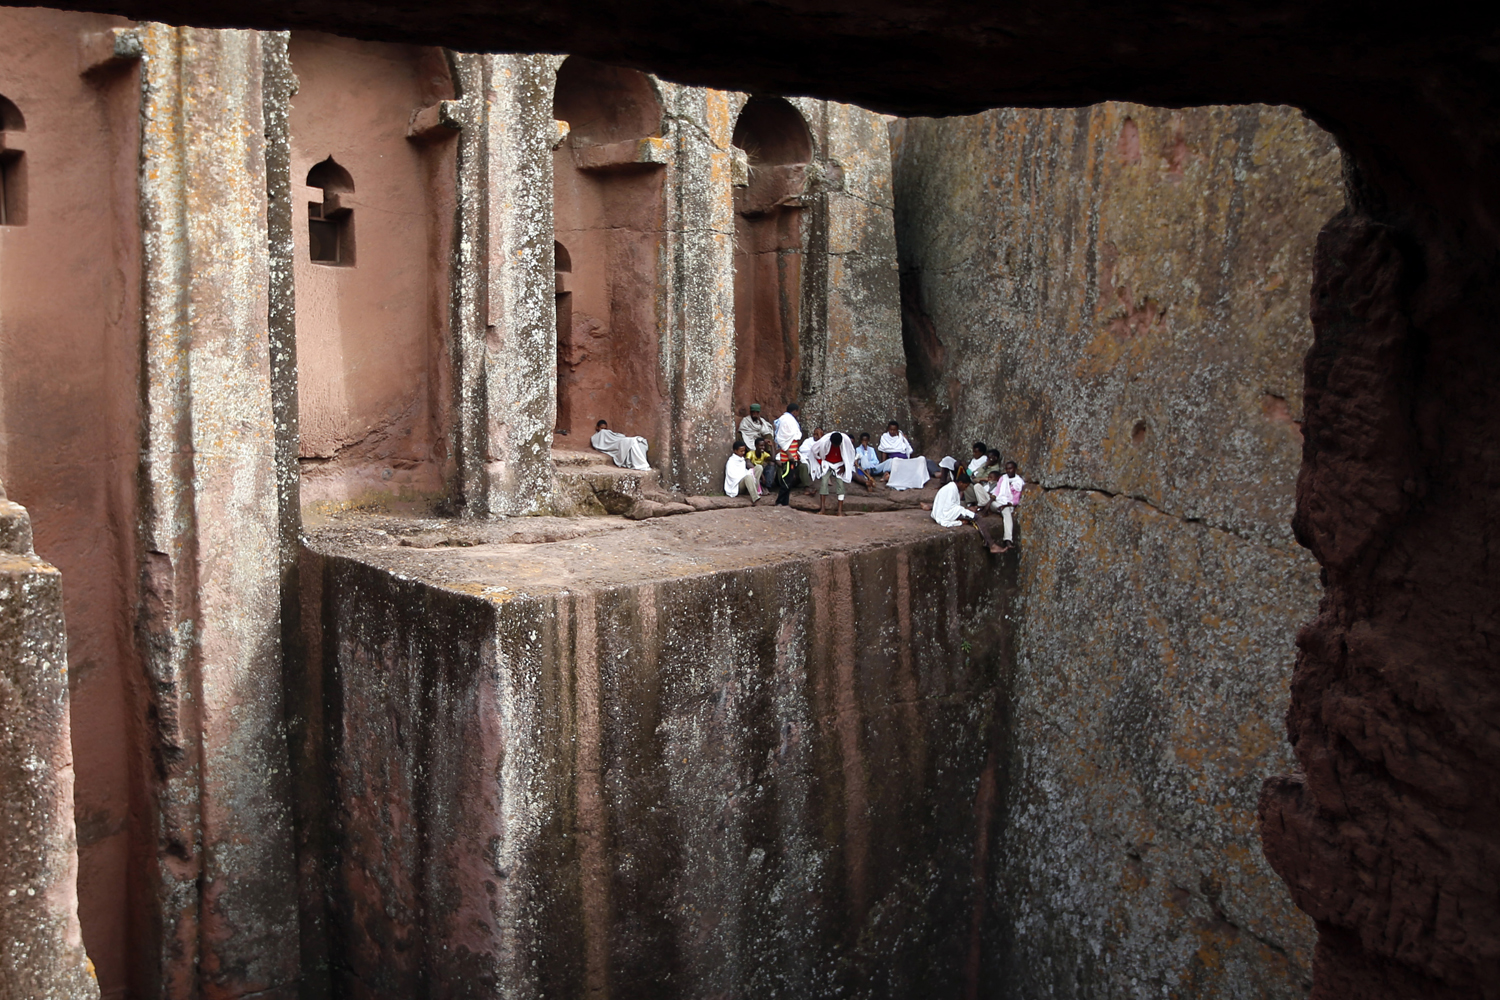 Orthodox Christians sit outside the famous monolithic rock-cut churches during a Good Friday celebration in Lalibela